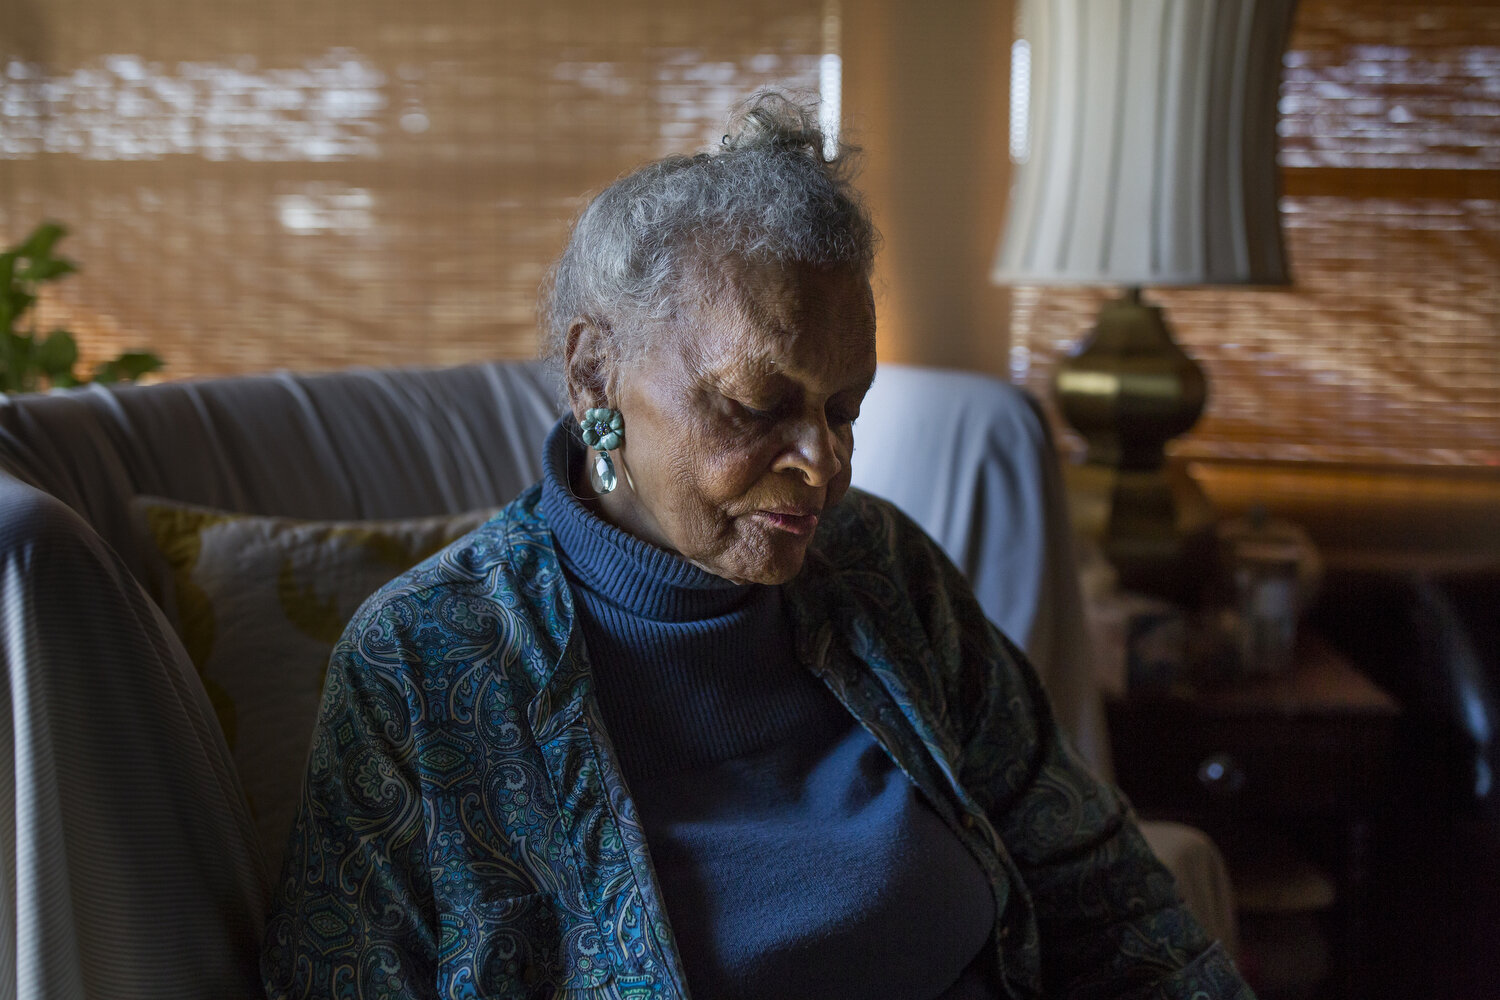  Evangeline Grant sits in her home which originally belonged to her parents in Tillery. Grant's family fought the government for 30 years to maintain control of the land after their farm was foreclosed on in 1978. Evangeline and her brother Gary Gran